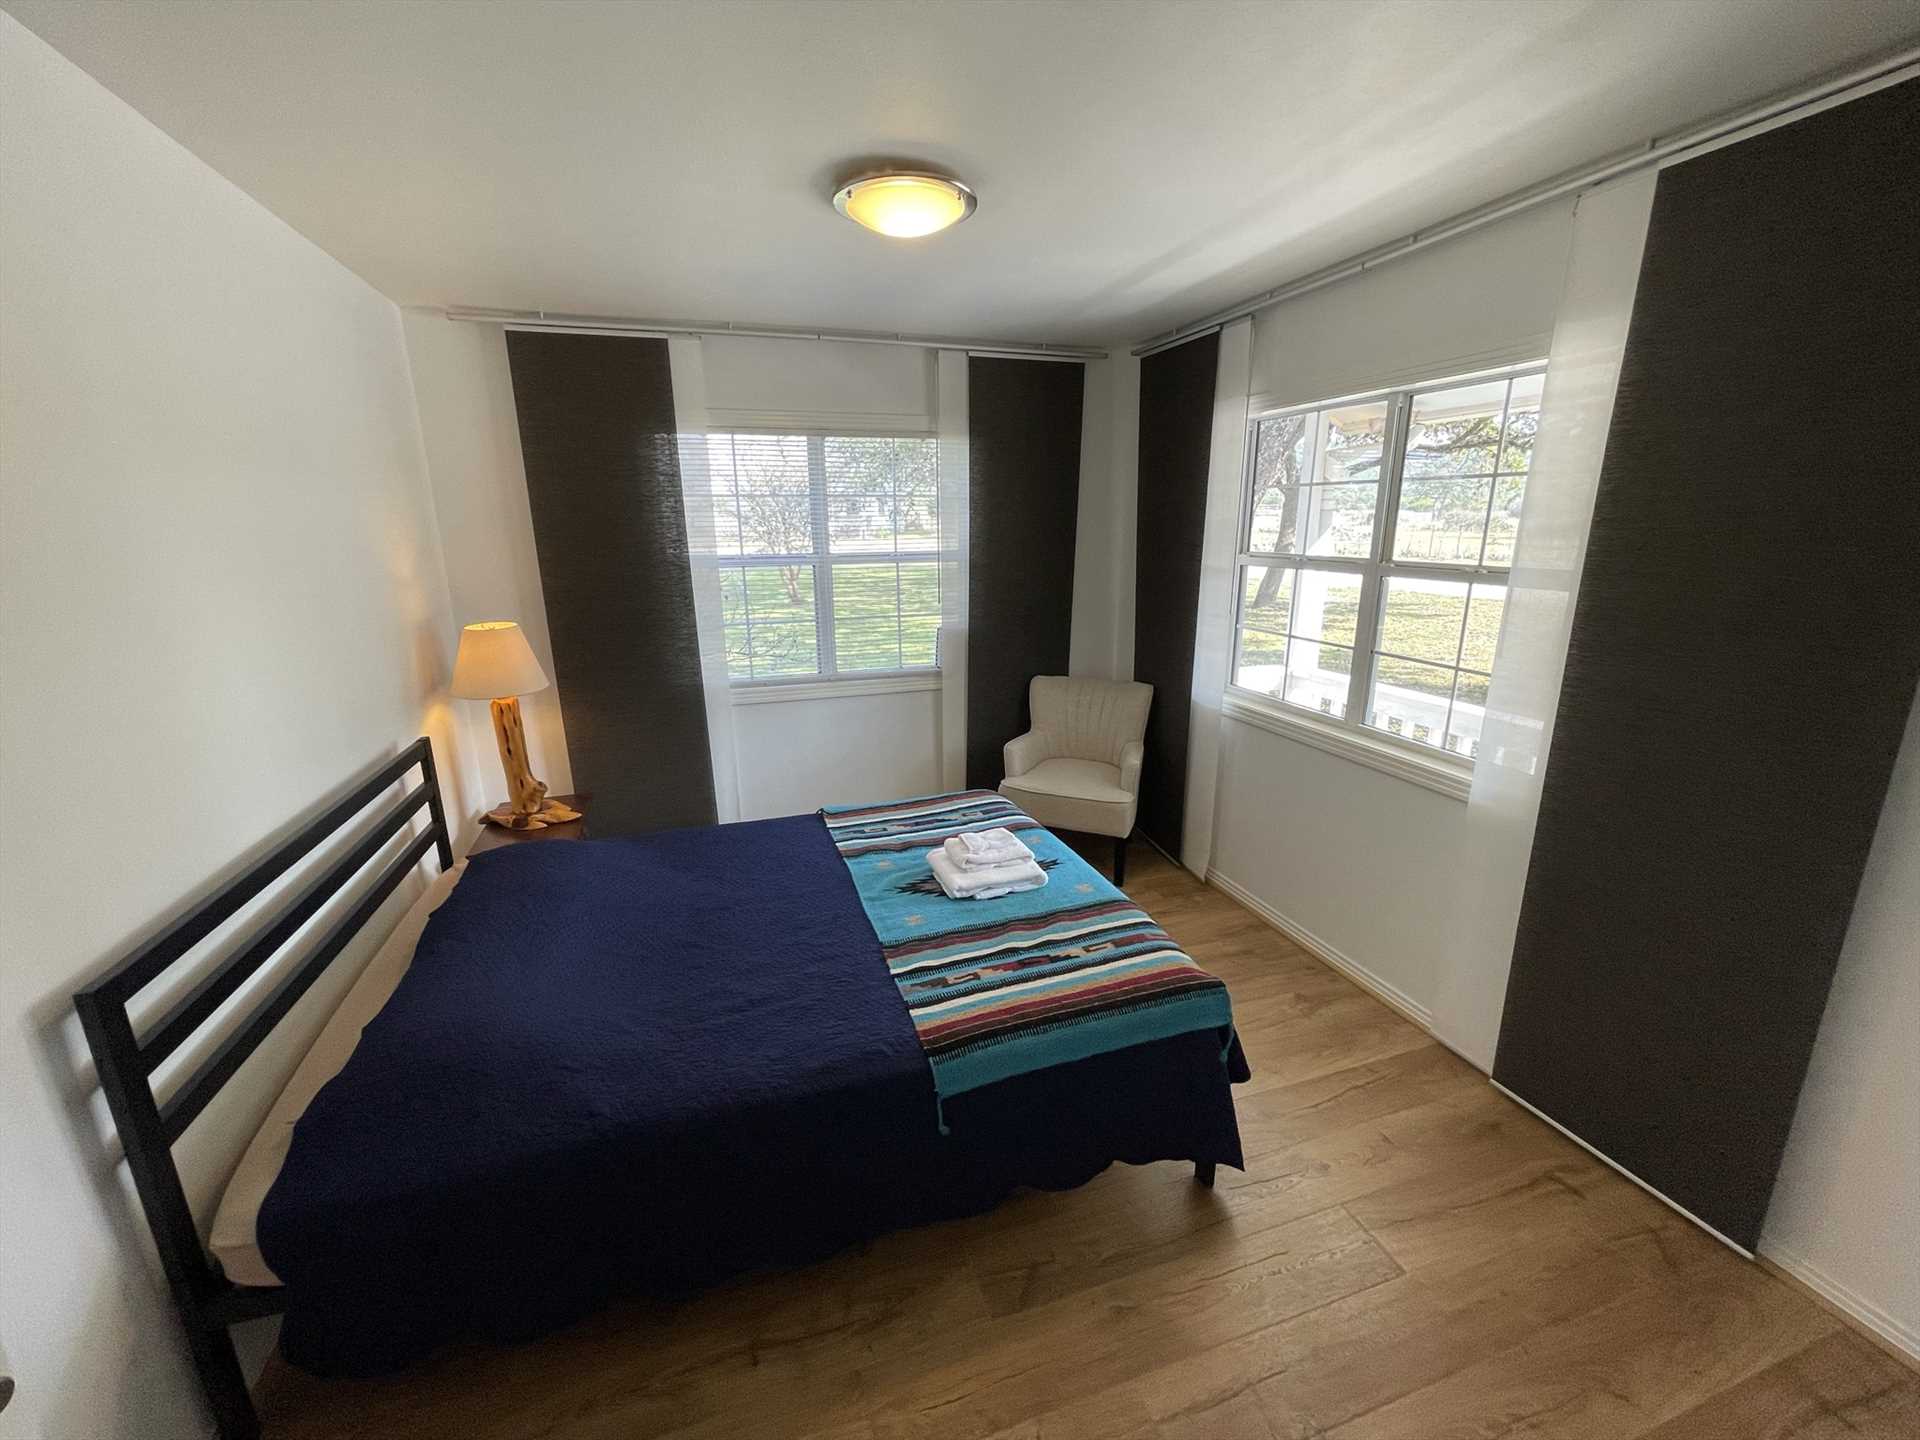                                                 Natural light awakens you in the morning in the second bedroom, complete with a queen-sized bed! Clean and soft bed linens are included, too.